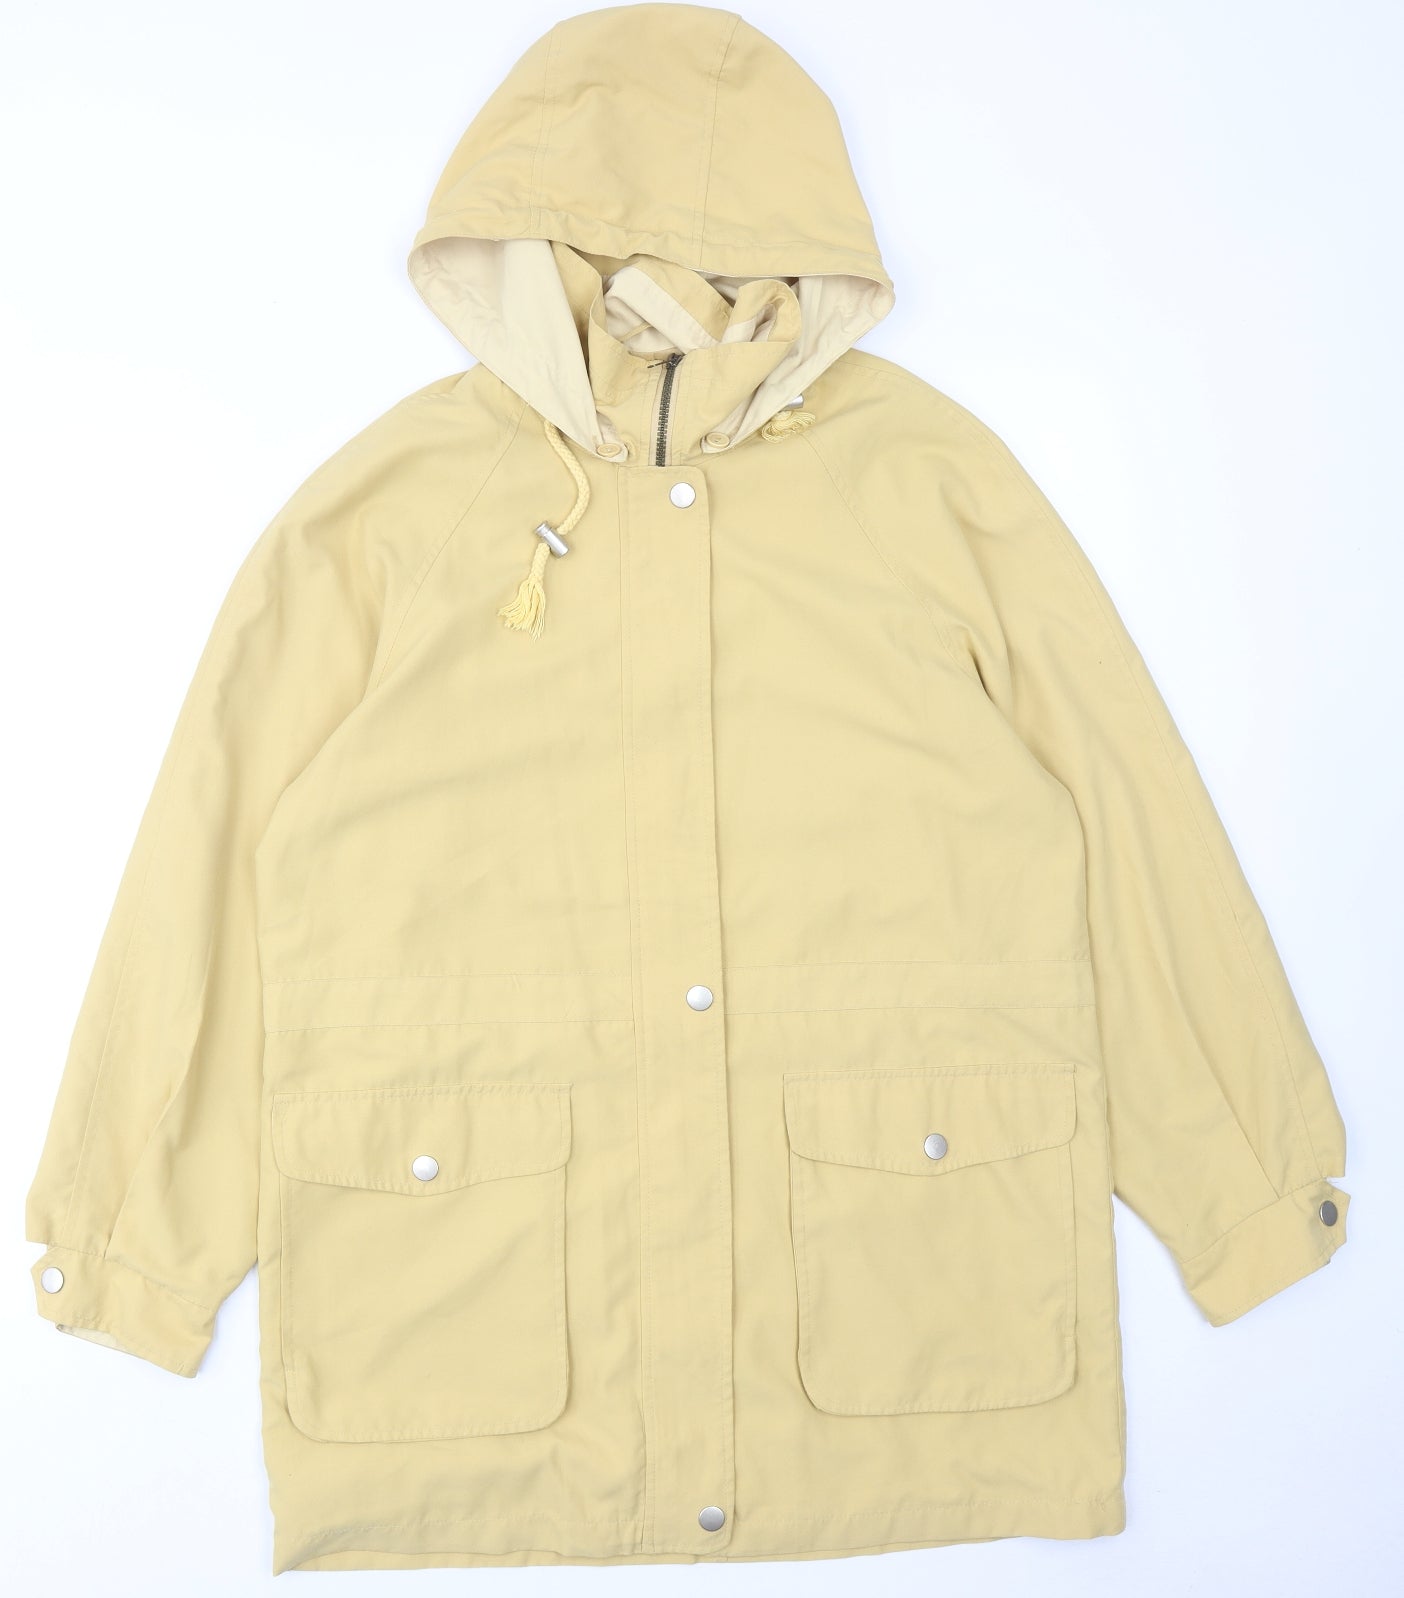 Compliments Womens Yellow Jacket Size 12 Zip